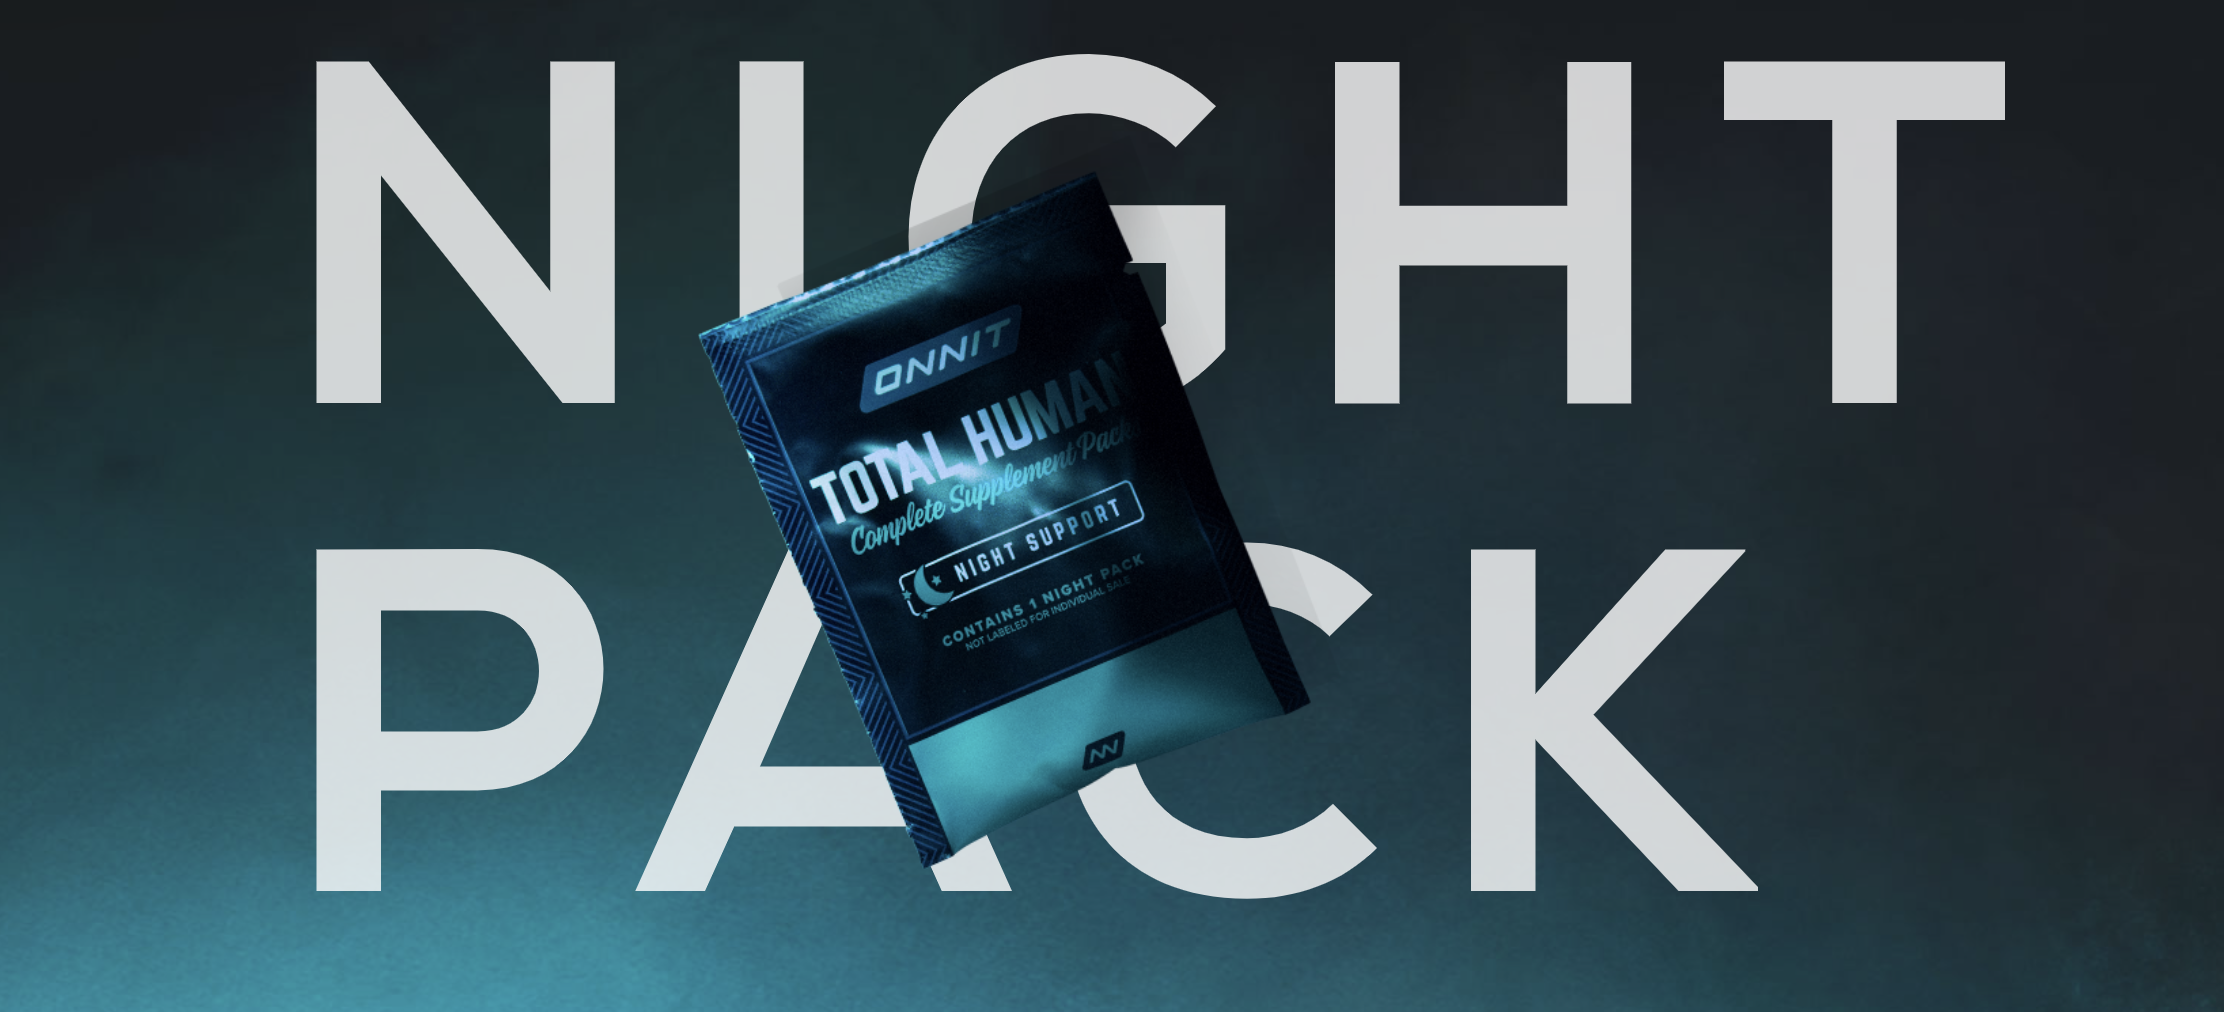 Onnit total human day pack